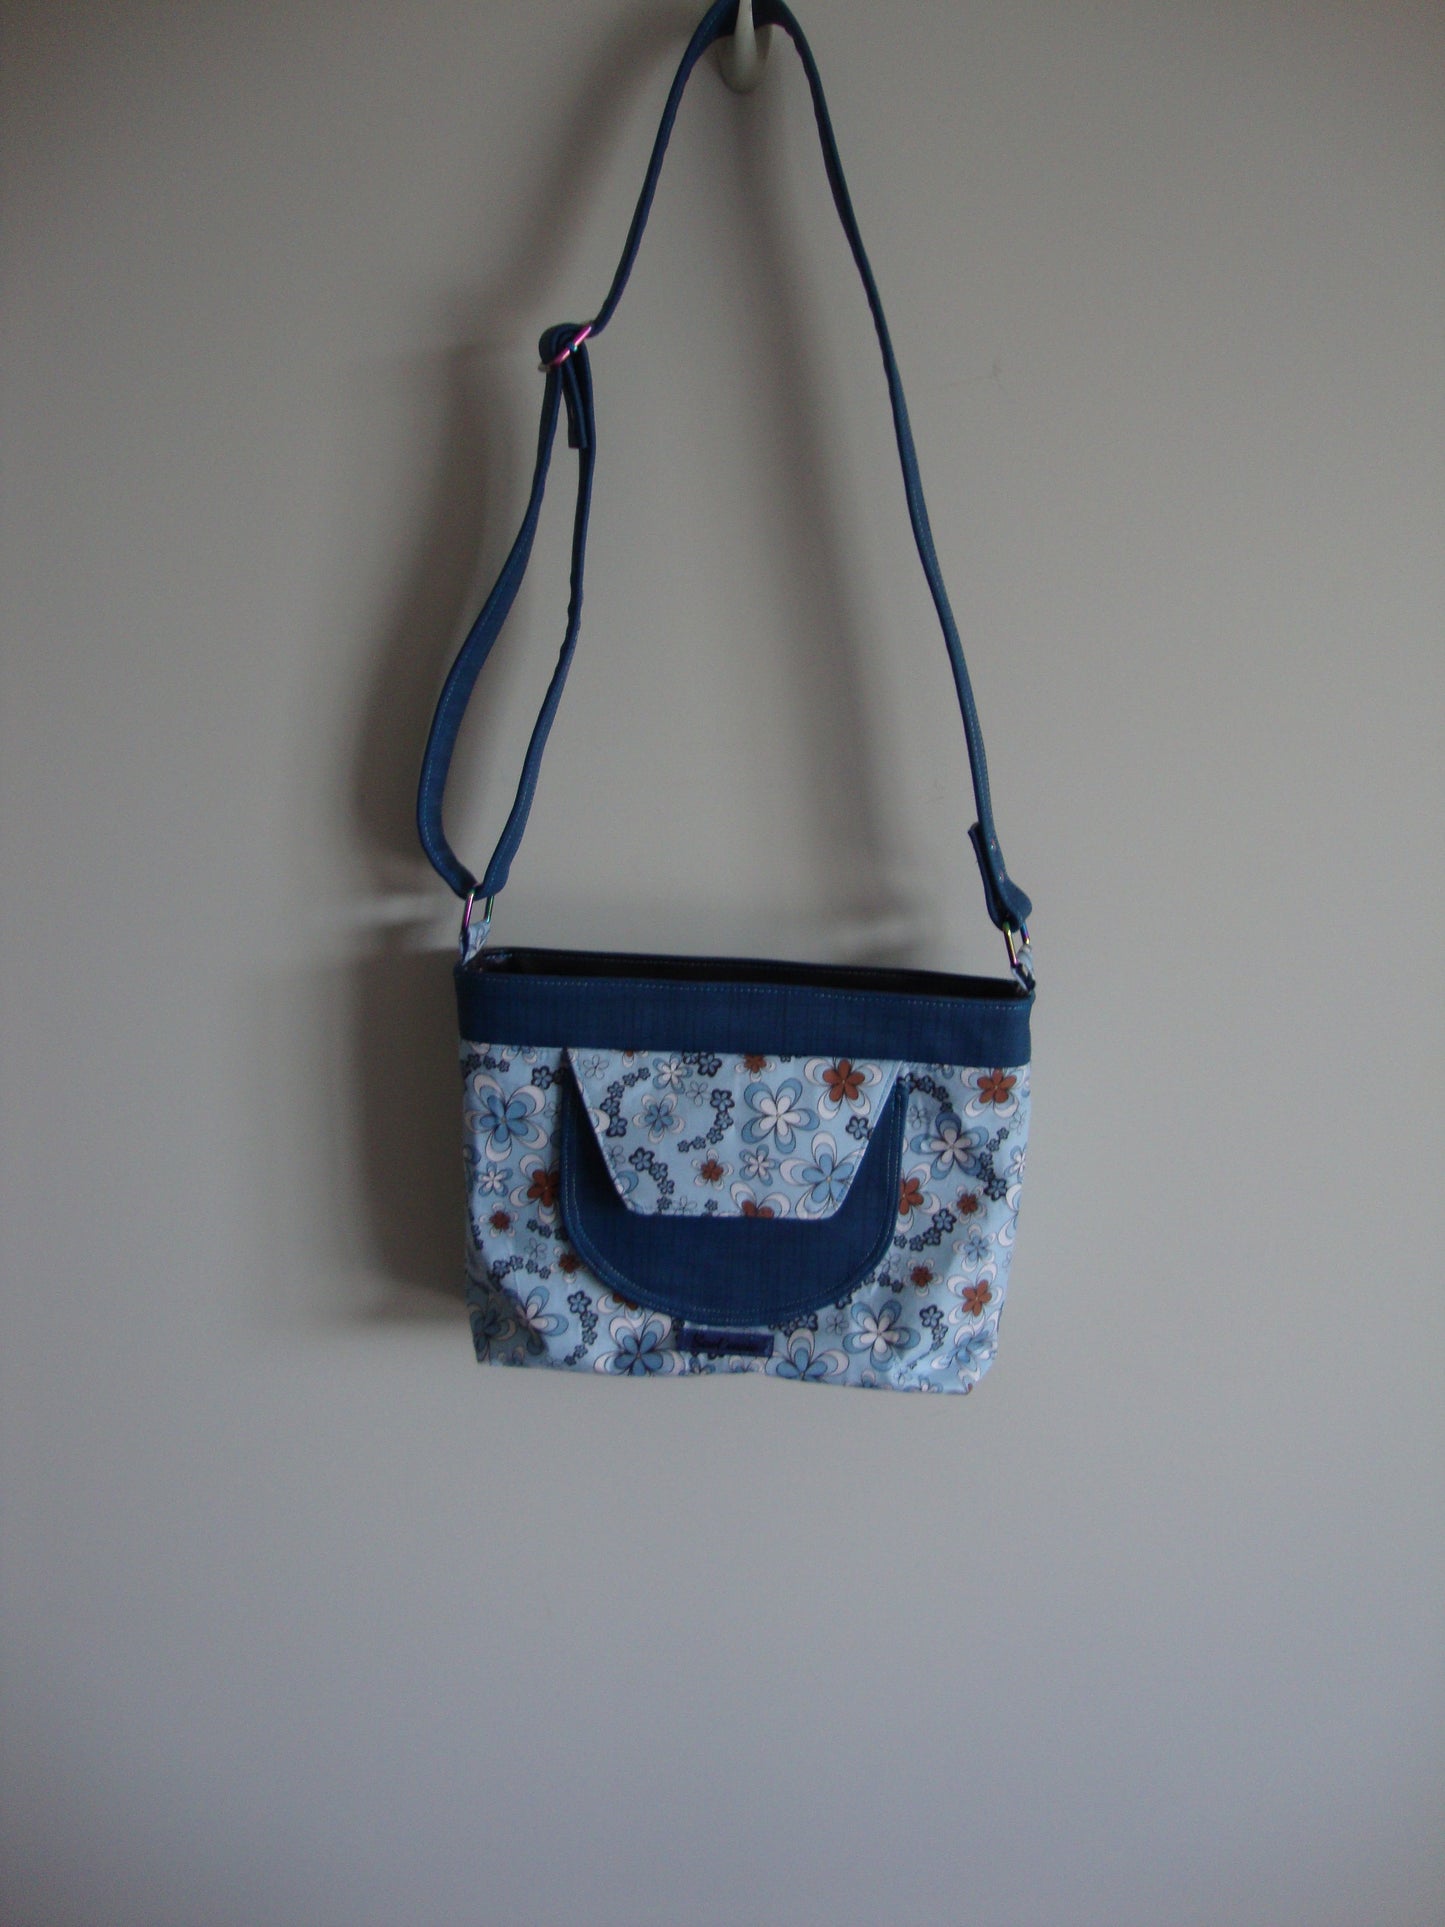 Blue and White Floral with Dark Blue Vinyl Crossbody Bag